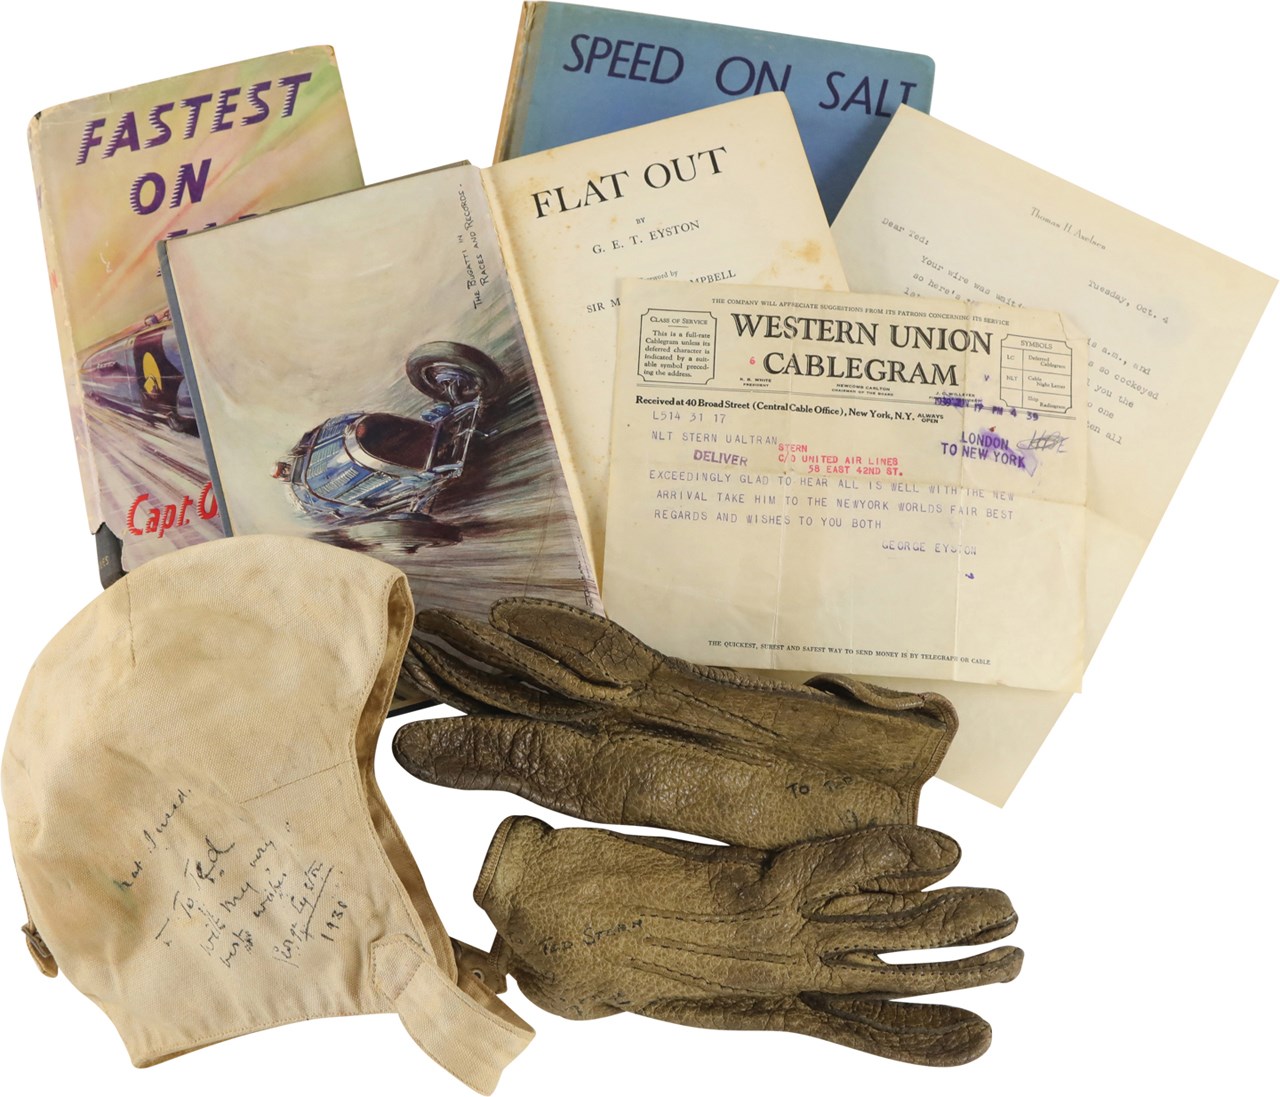 Olympics and All Sports - George Eyston Race Worn Gloves and Canvas Helmet Signed to His Public Relations Rep - Land Speed Record Pioneer